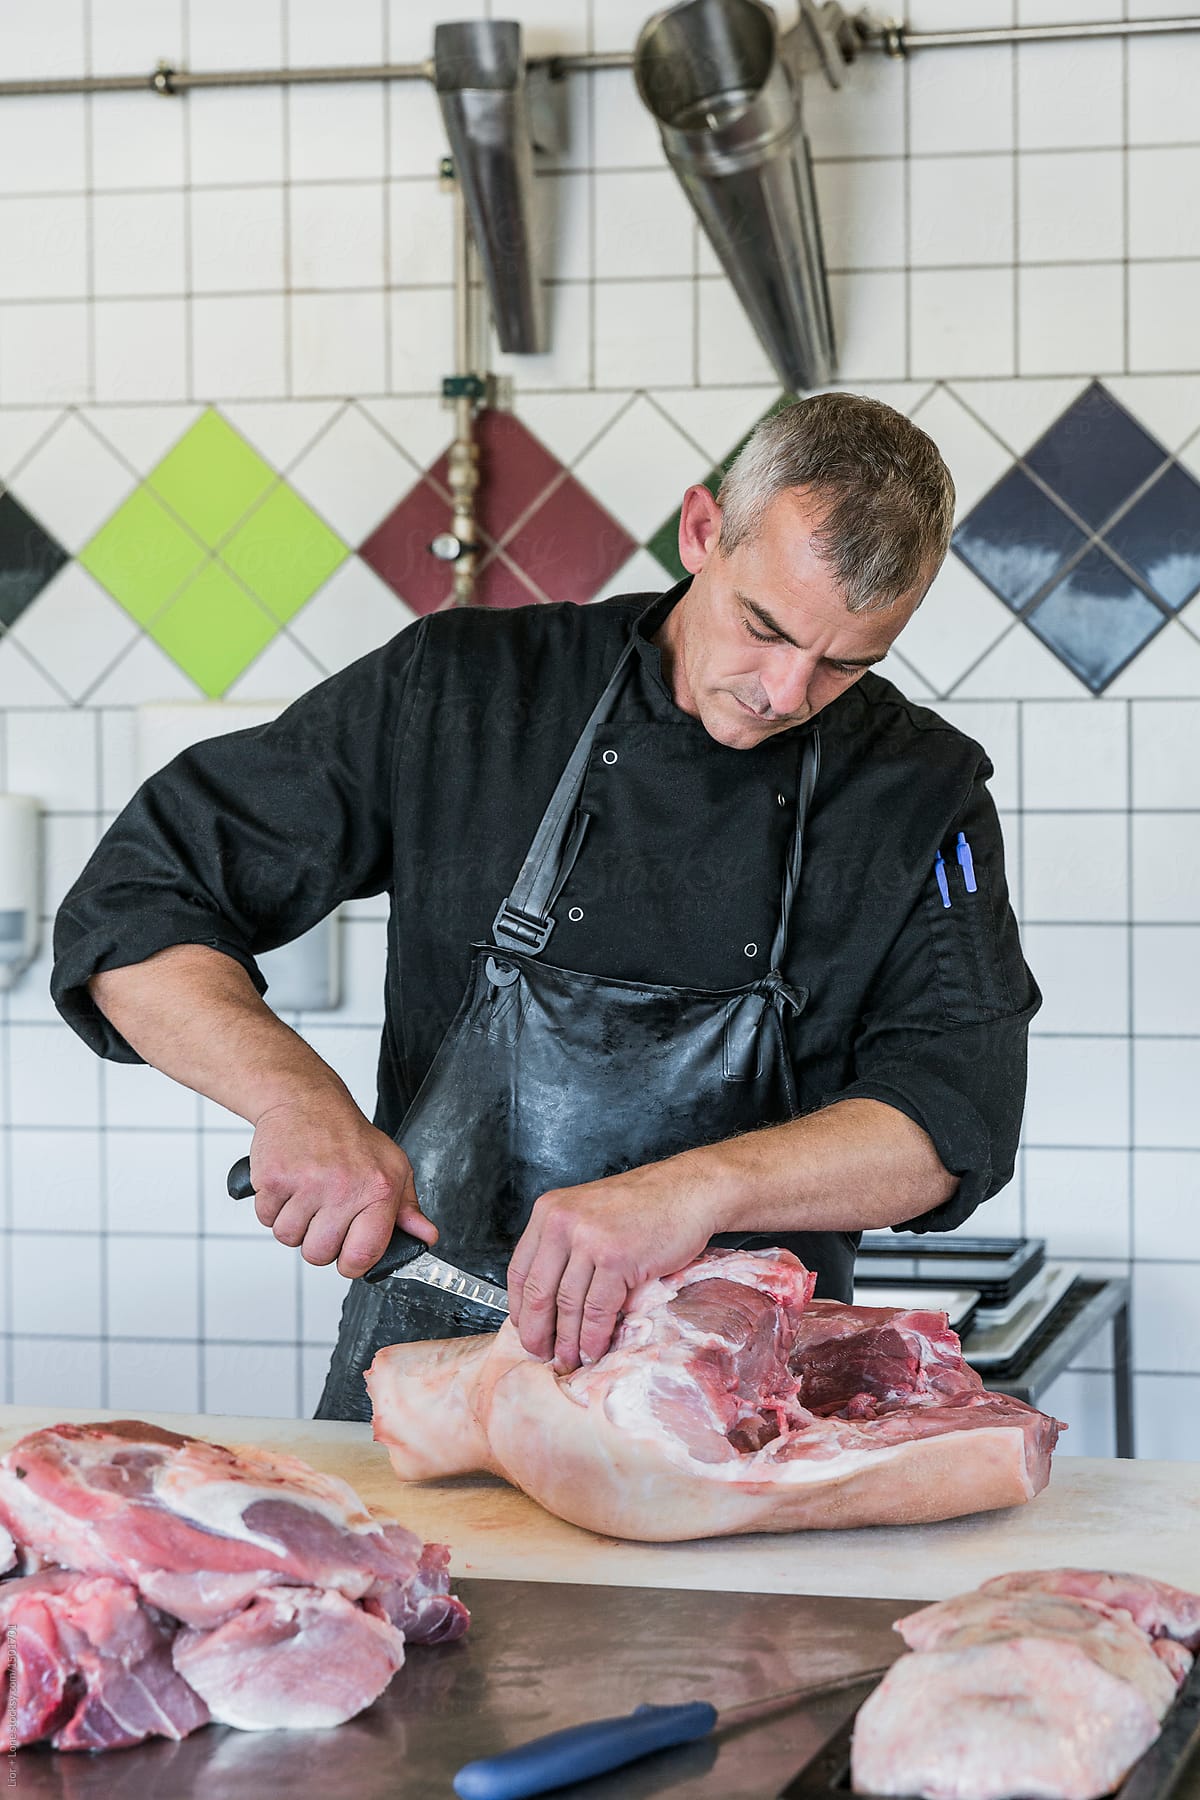 Man butcher working cutting a big piece of meat